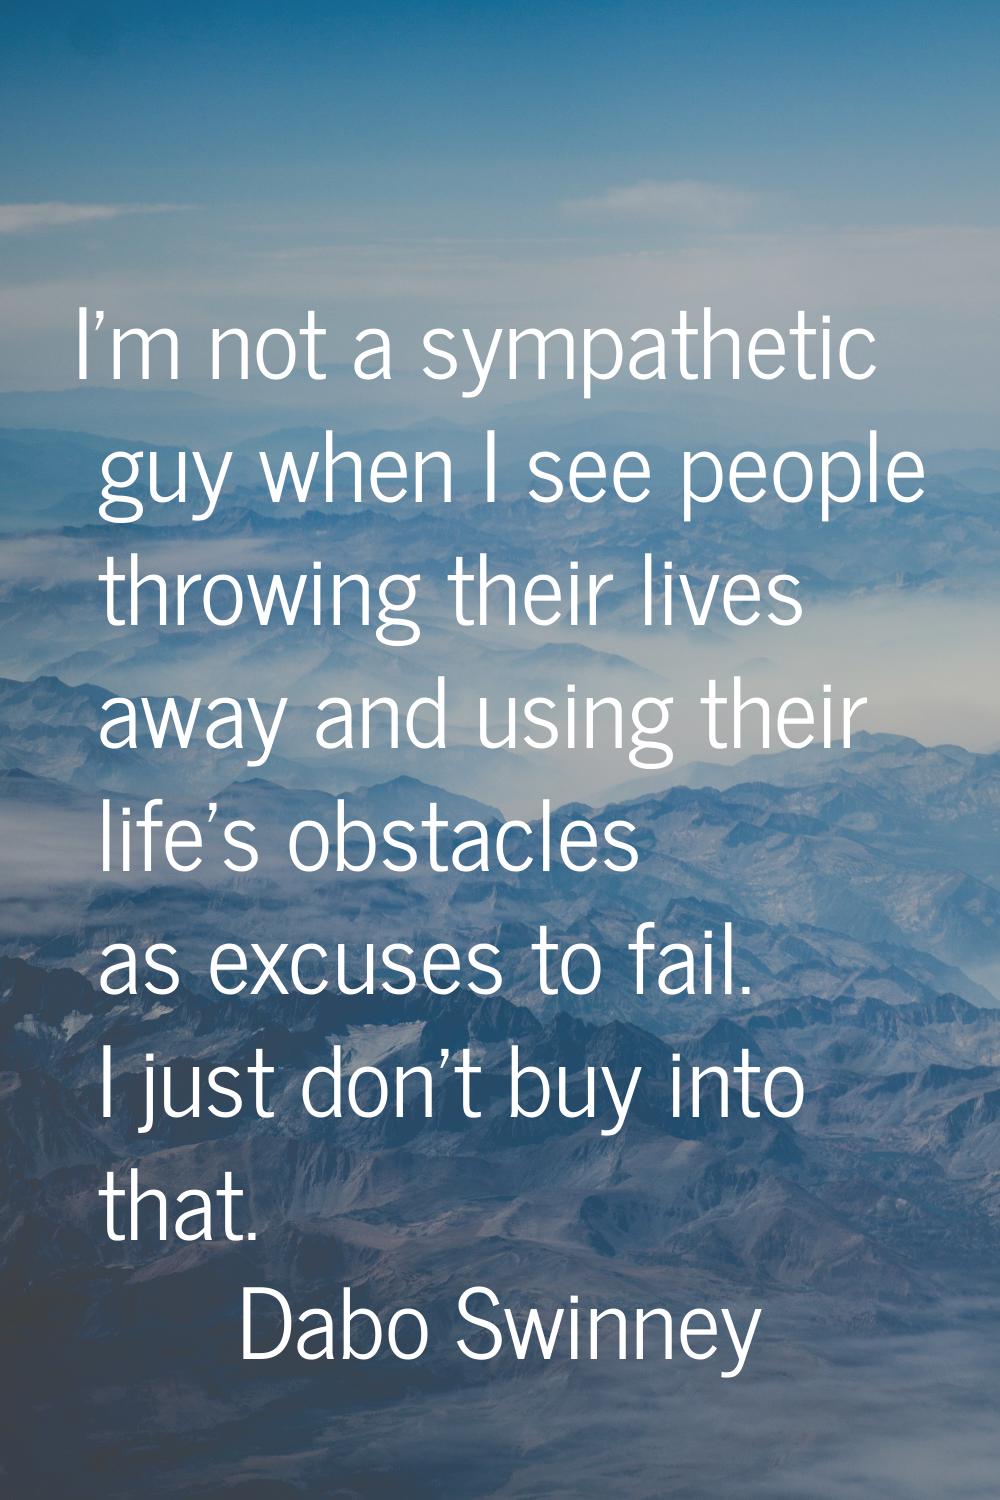 I'm not a sympathetic guy when I see people throwing their lives away and using their life's obstac